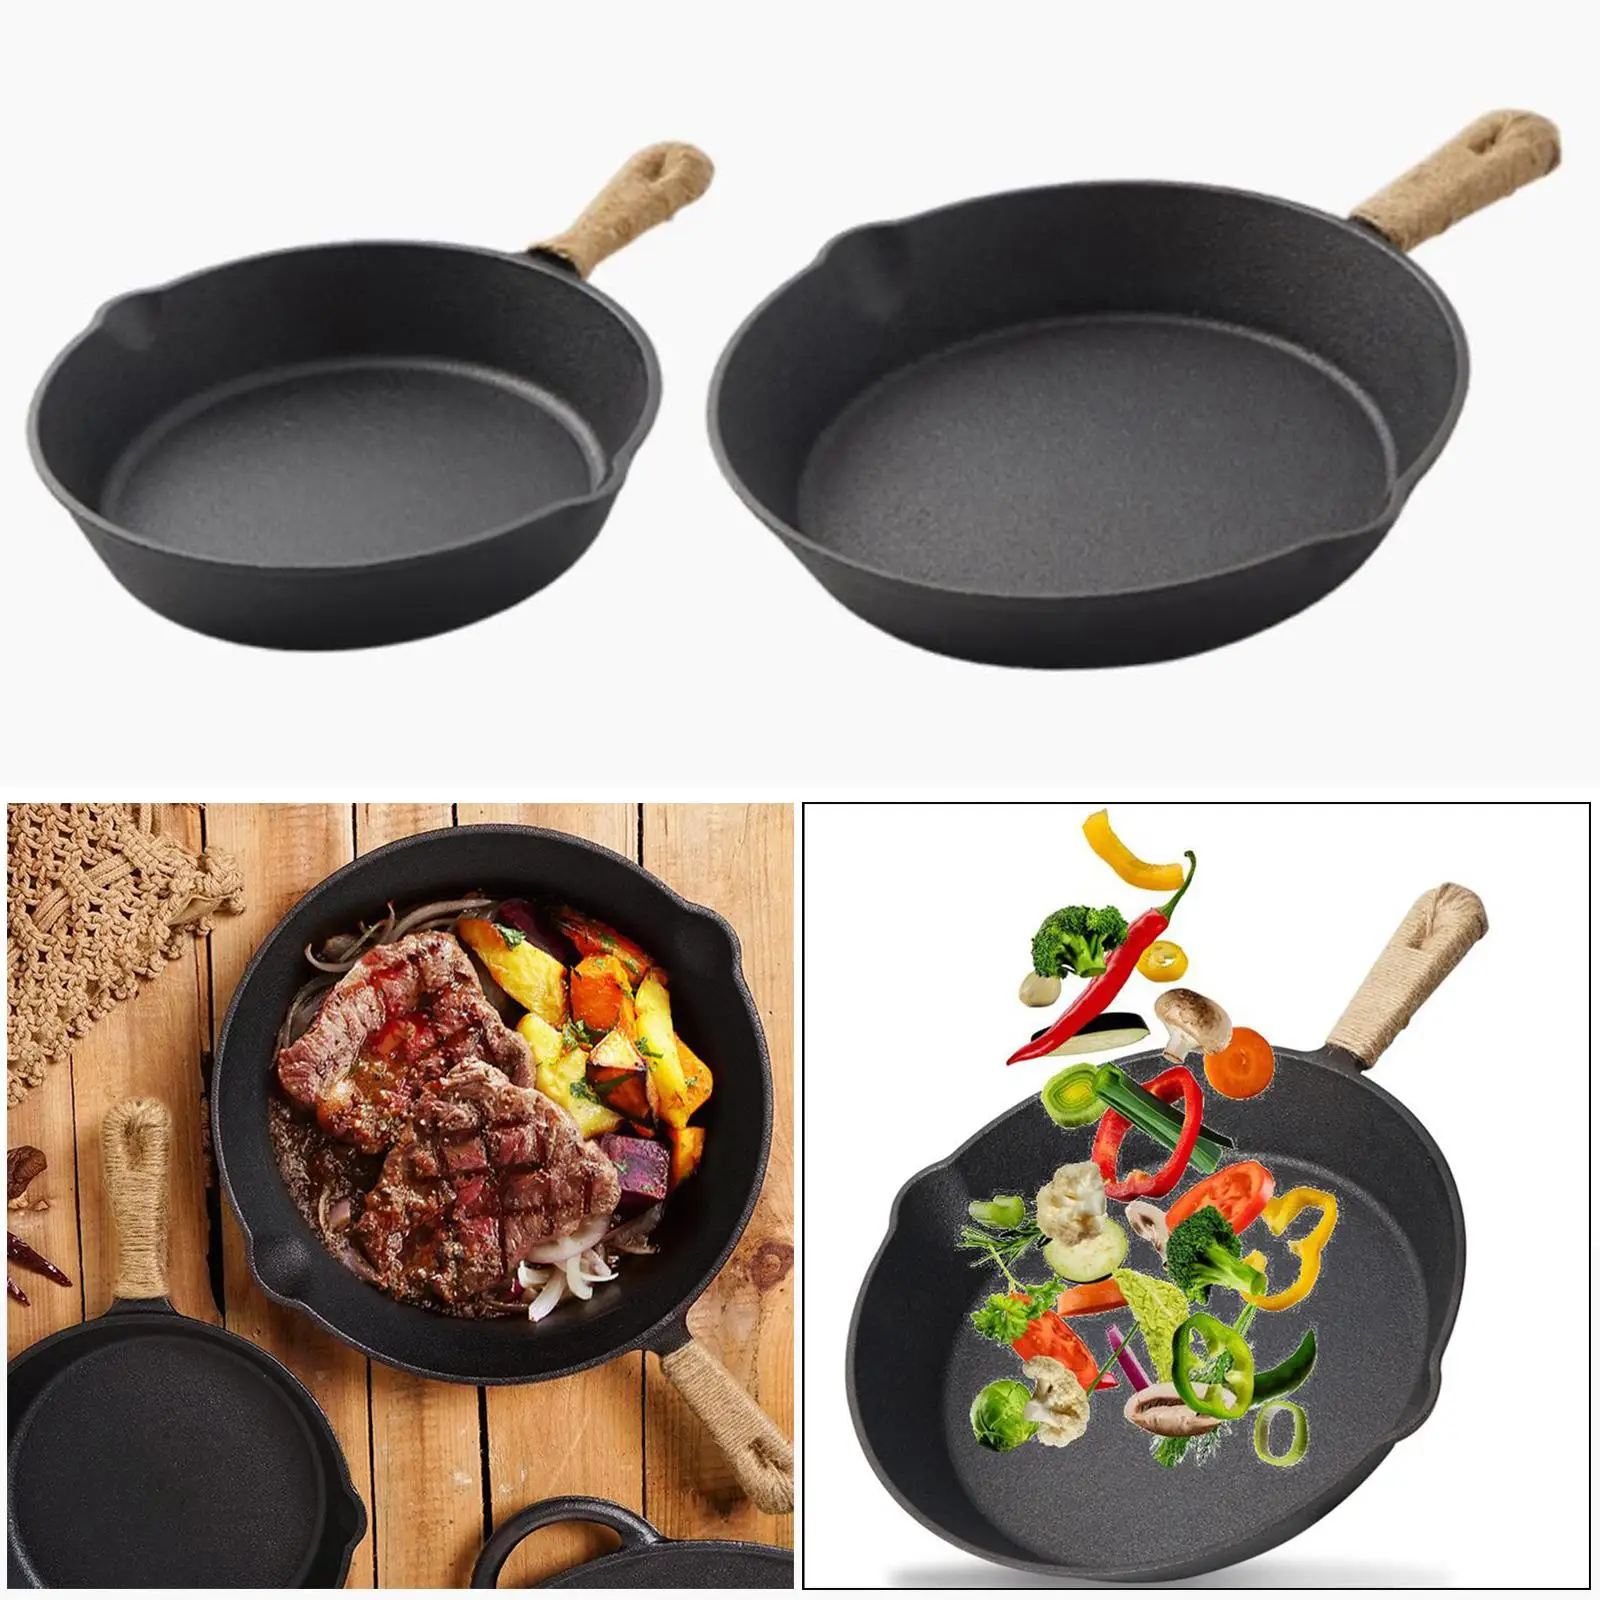 Camping Iron Nonstick Frying Pan - Frying Pan for Oven, Induction, Gas,